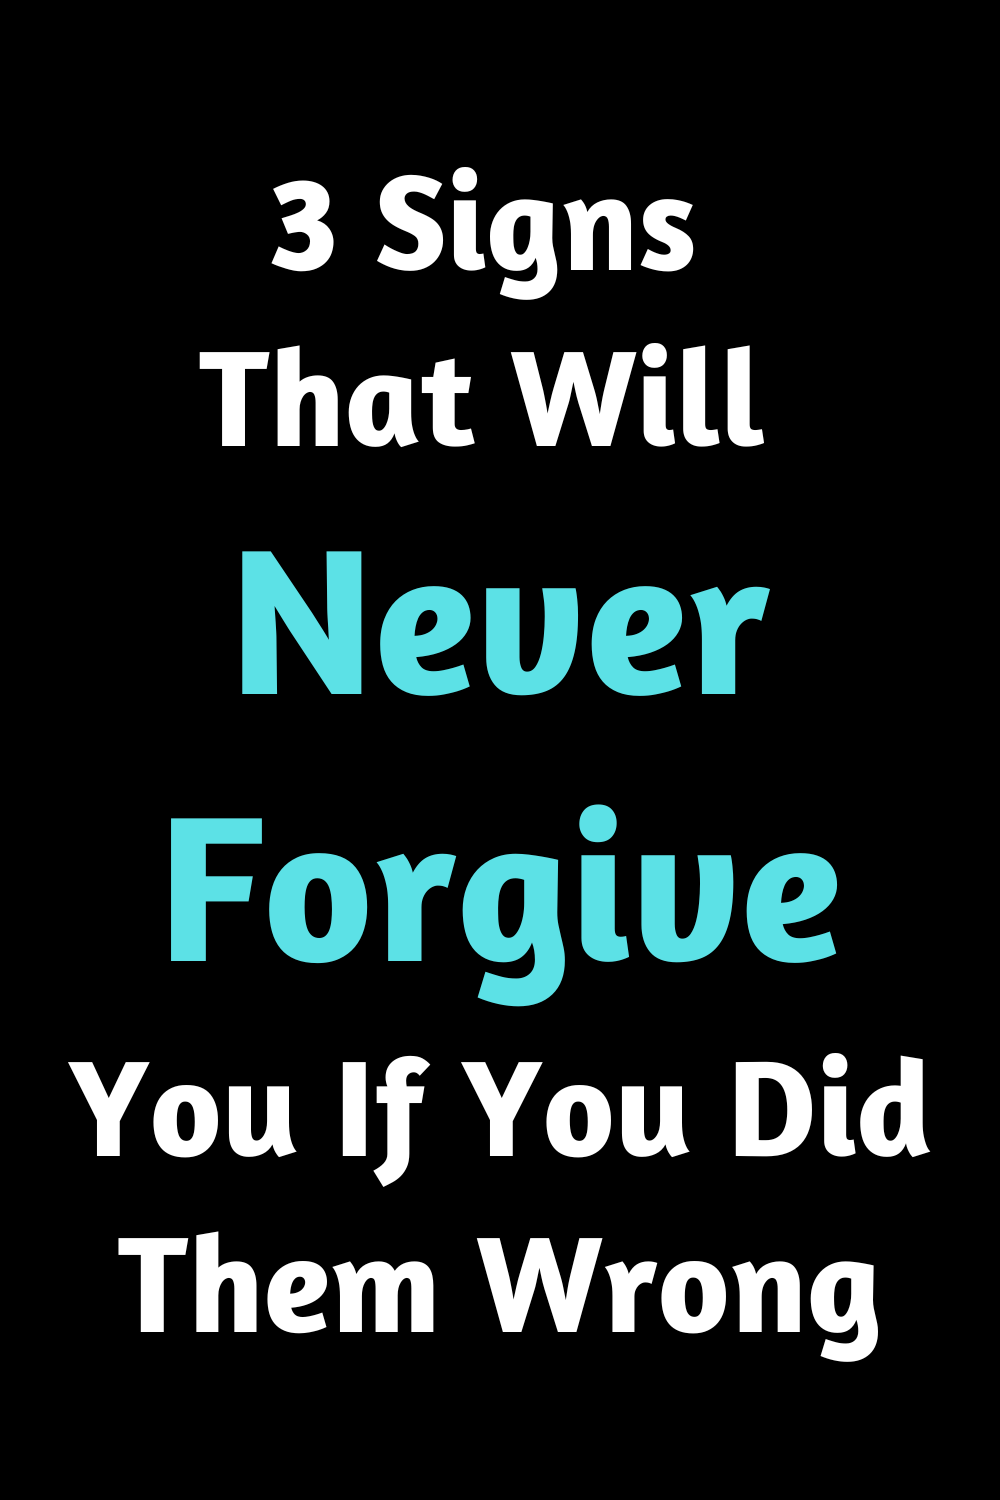 3 Signs That Will Never Forgive You If You Did Them Wrong